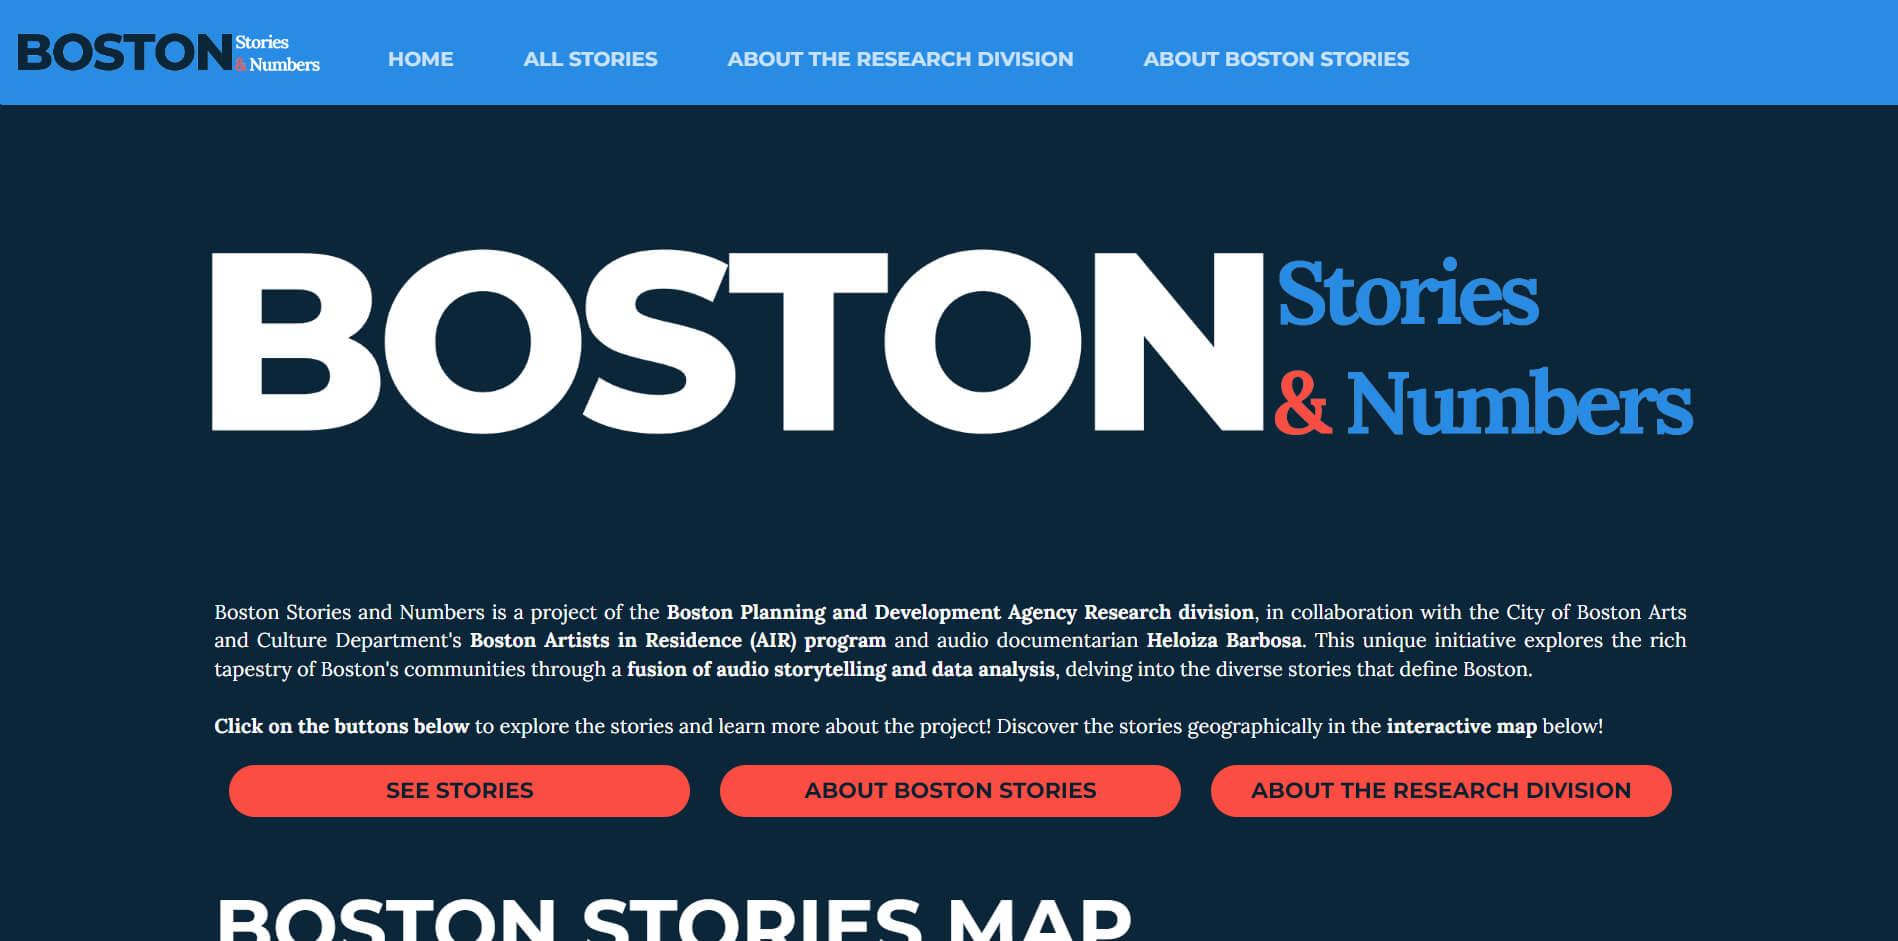 Boston Stories and Numbers explores the rich tapestry of Boston's communities through a fusion of audio storytelling and data analysis, delving into the diverse stories that define Boston.